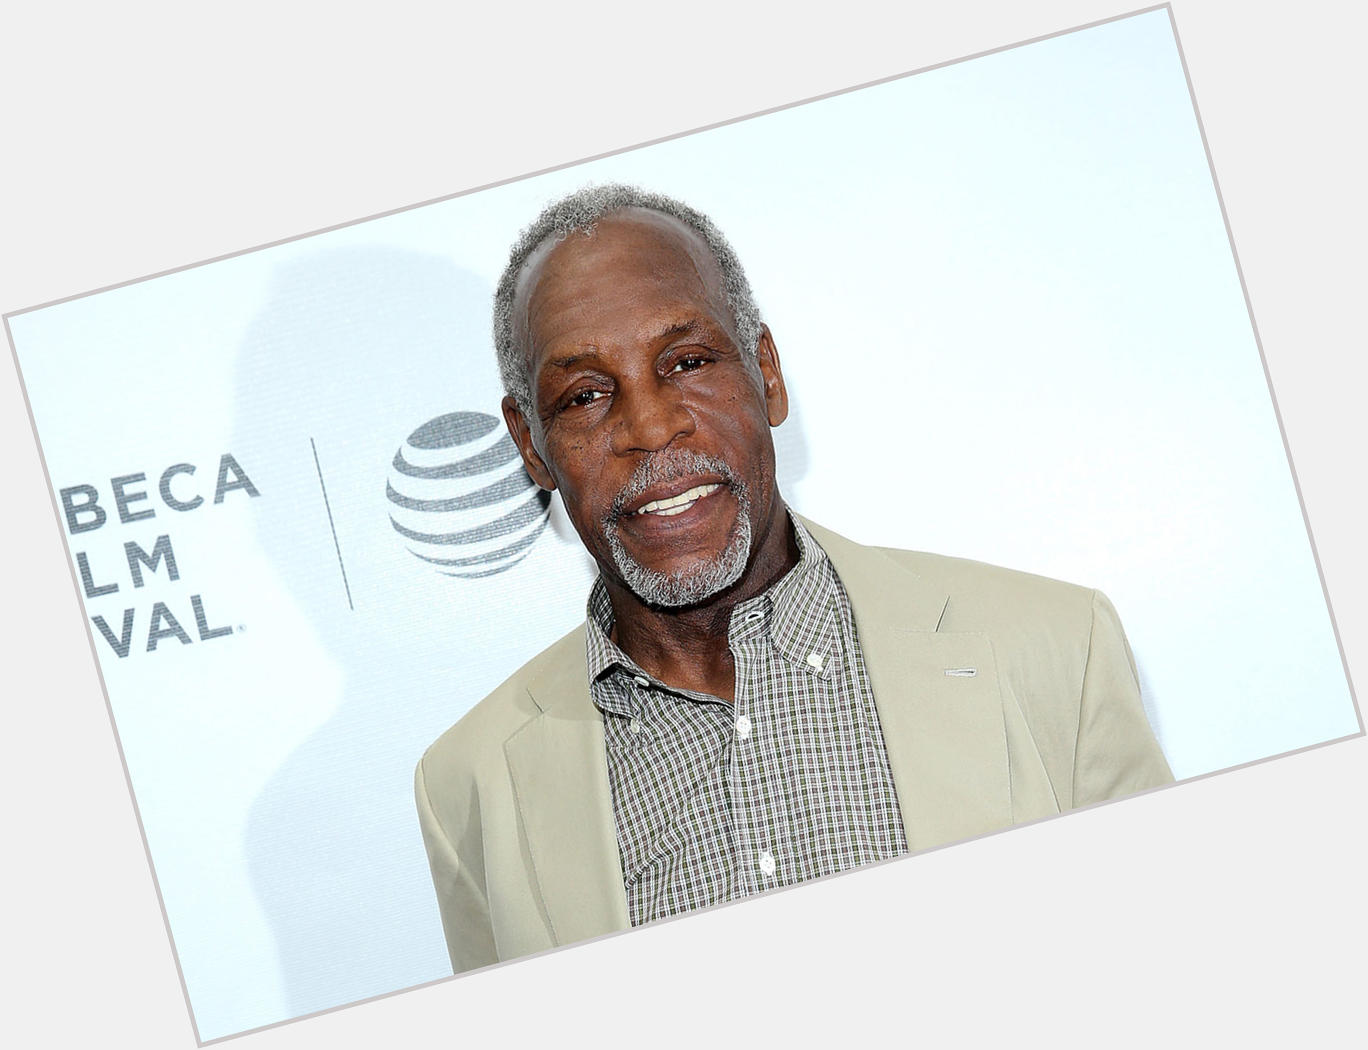 July 22, 2020
74 years old today: Happy Birthday Danny Glover. 